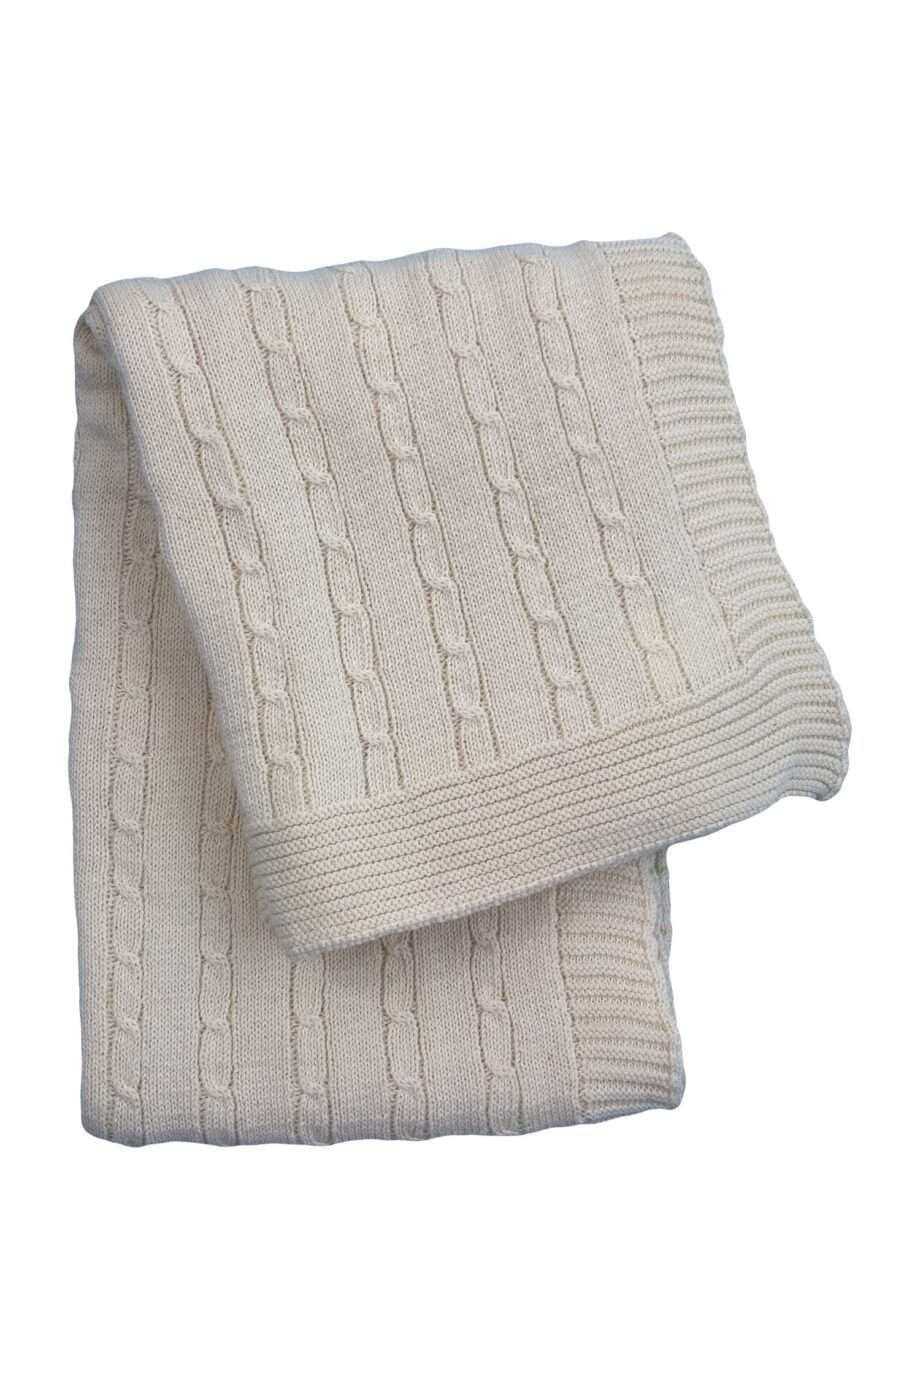 twist small linen knitted cotton little blanket small